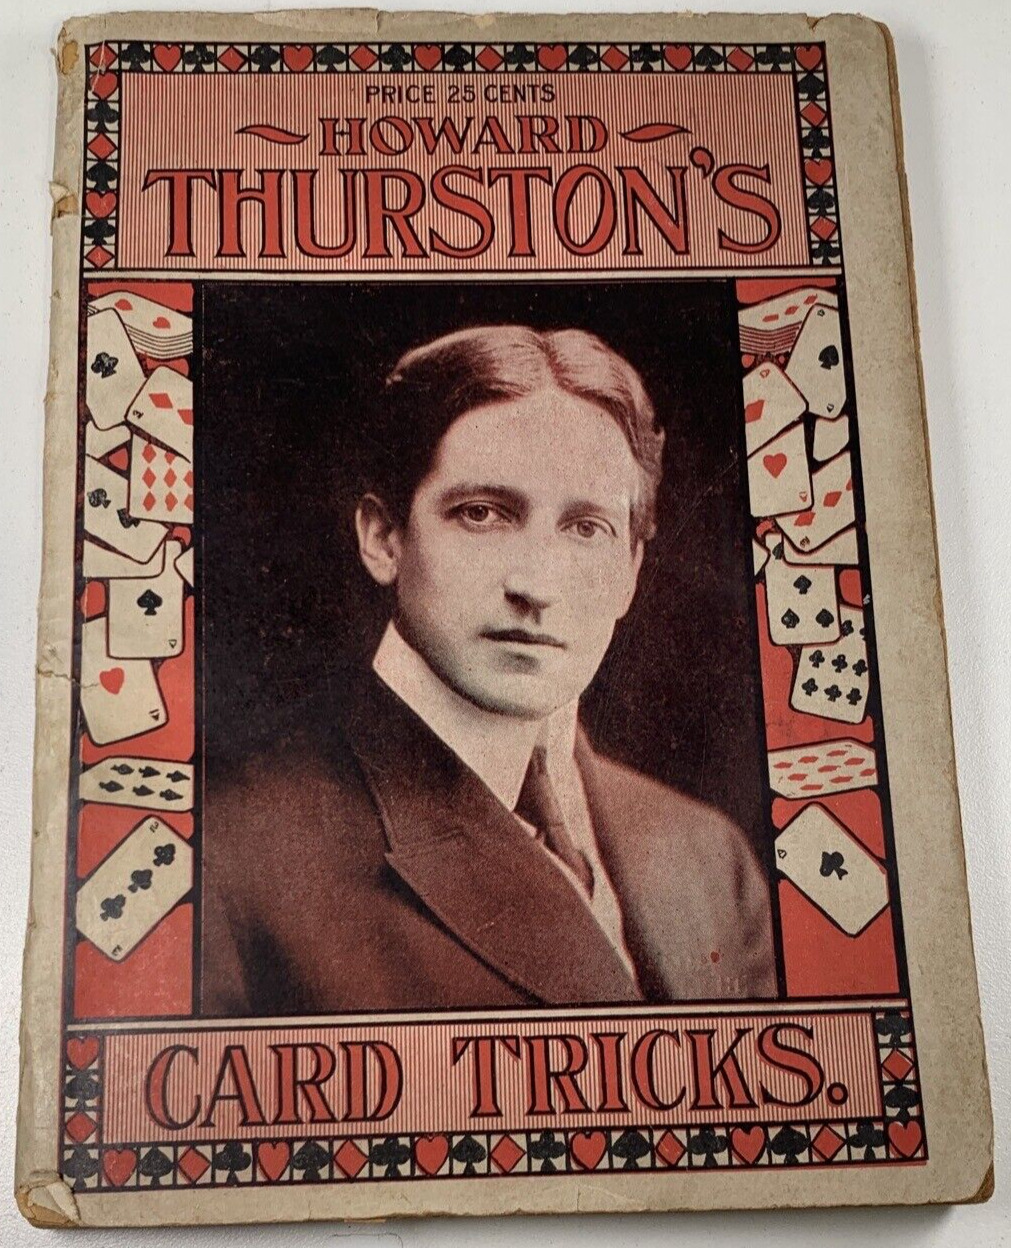 1903 Howard Thurston\'s Card Tricks Magic Guide 1st Ed. VERY RARE 25 Cents Cover